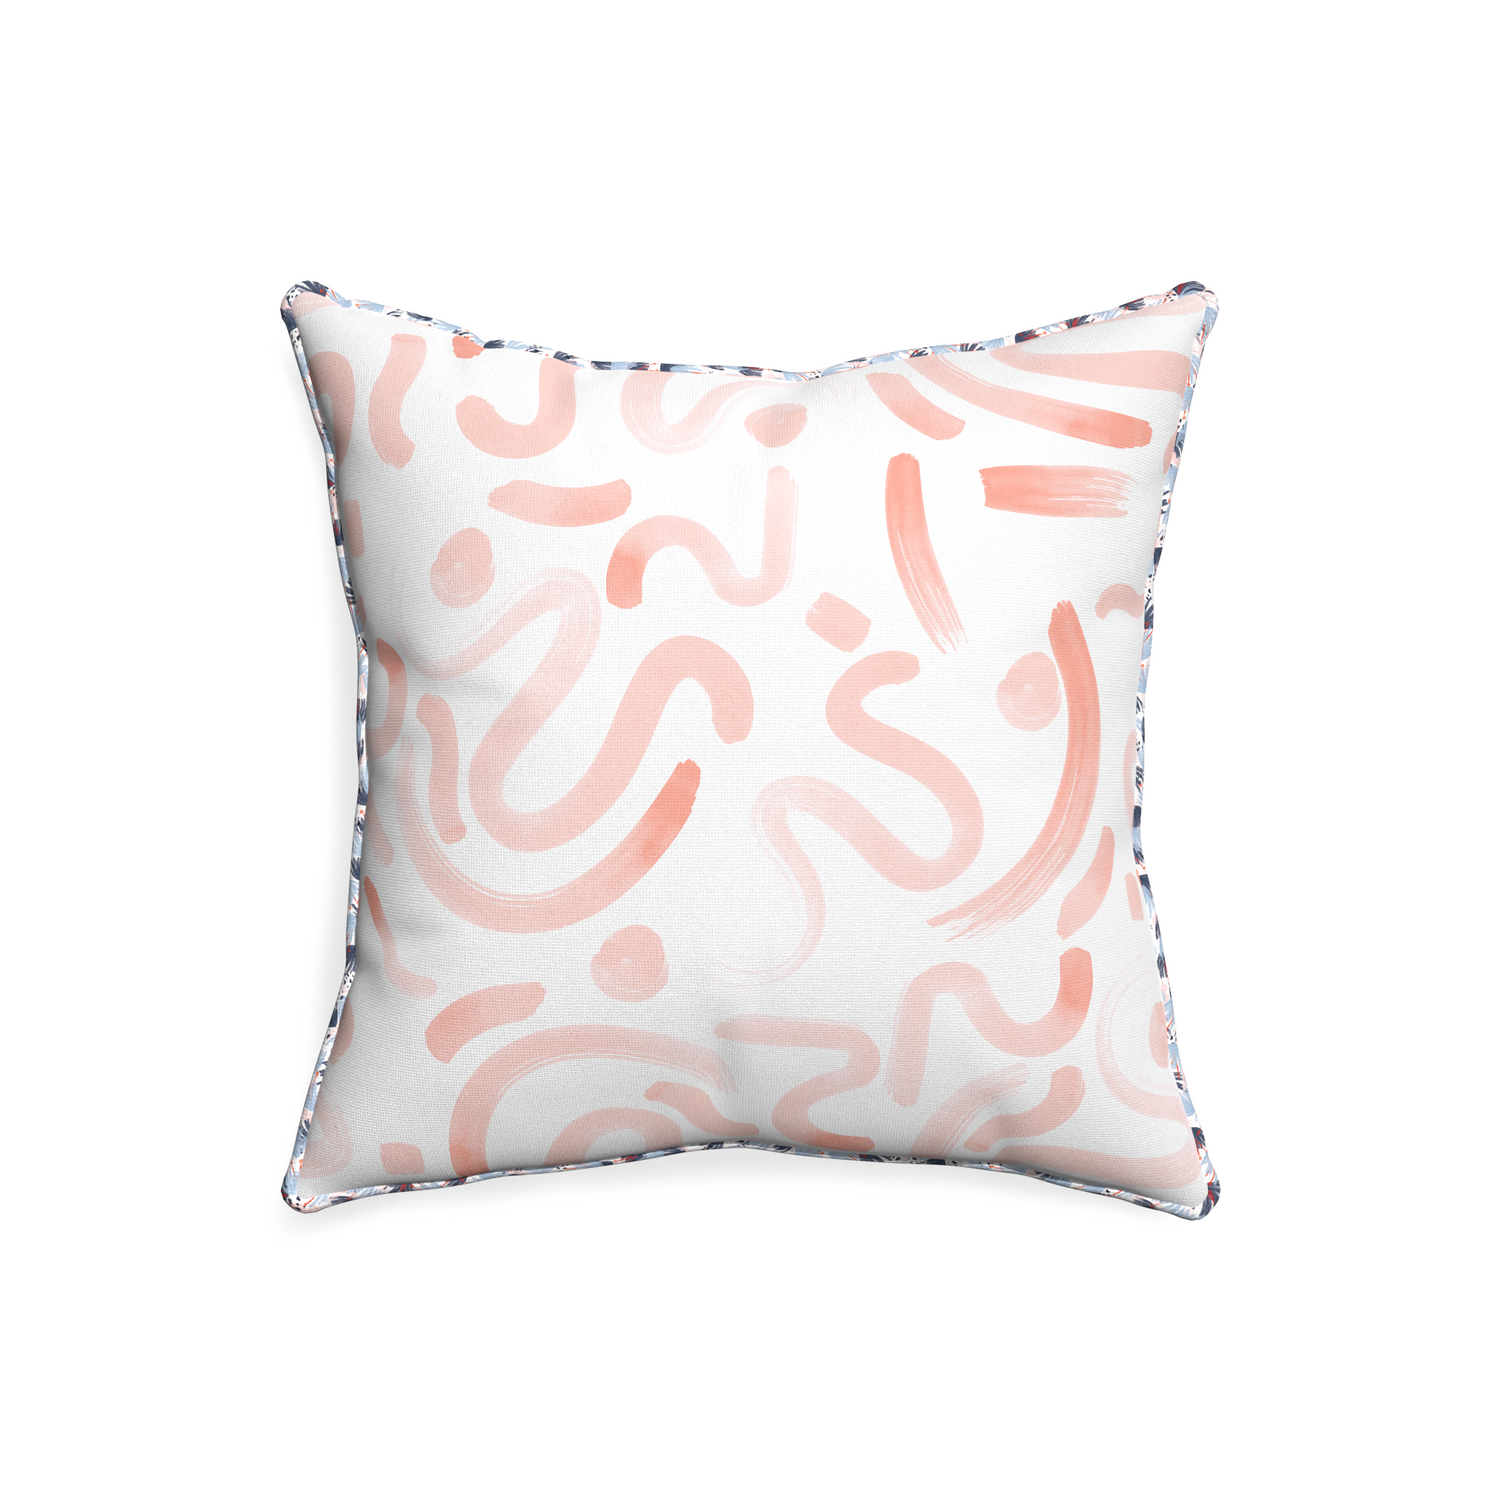 20-square hockney pink custom pink graphicpillow with e piping on white background